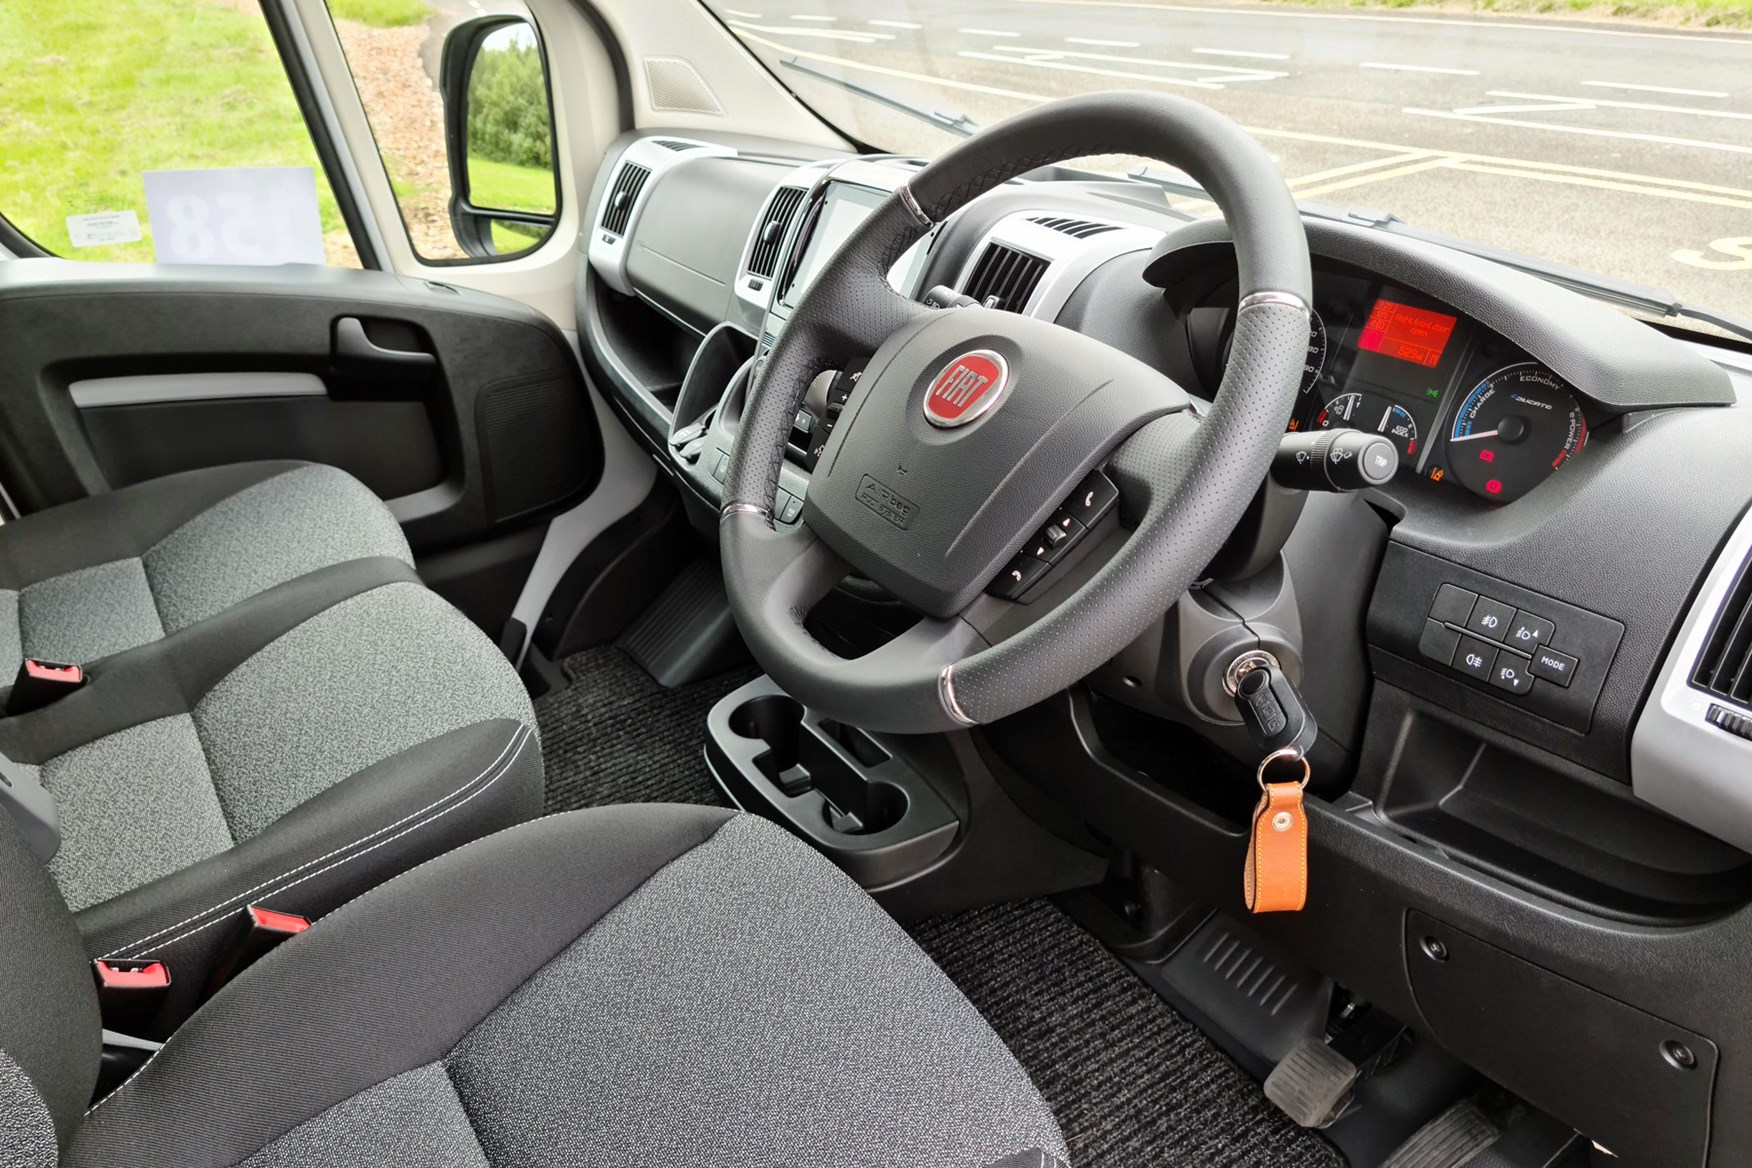 Fiat E-Ducato review: There's less stress driving in Fiat's electric van